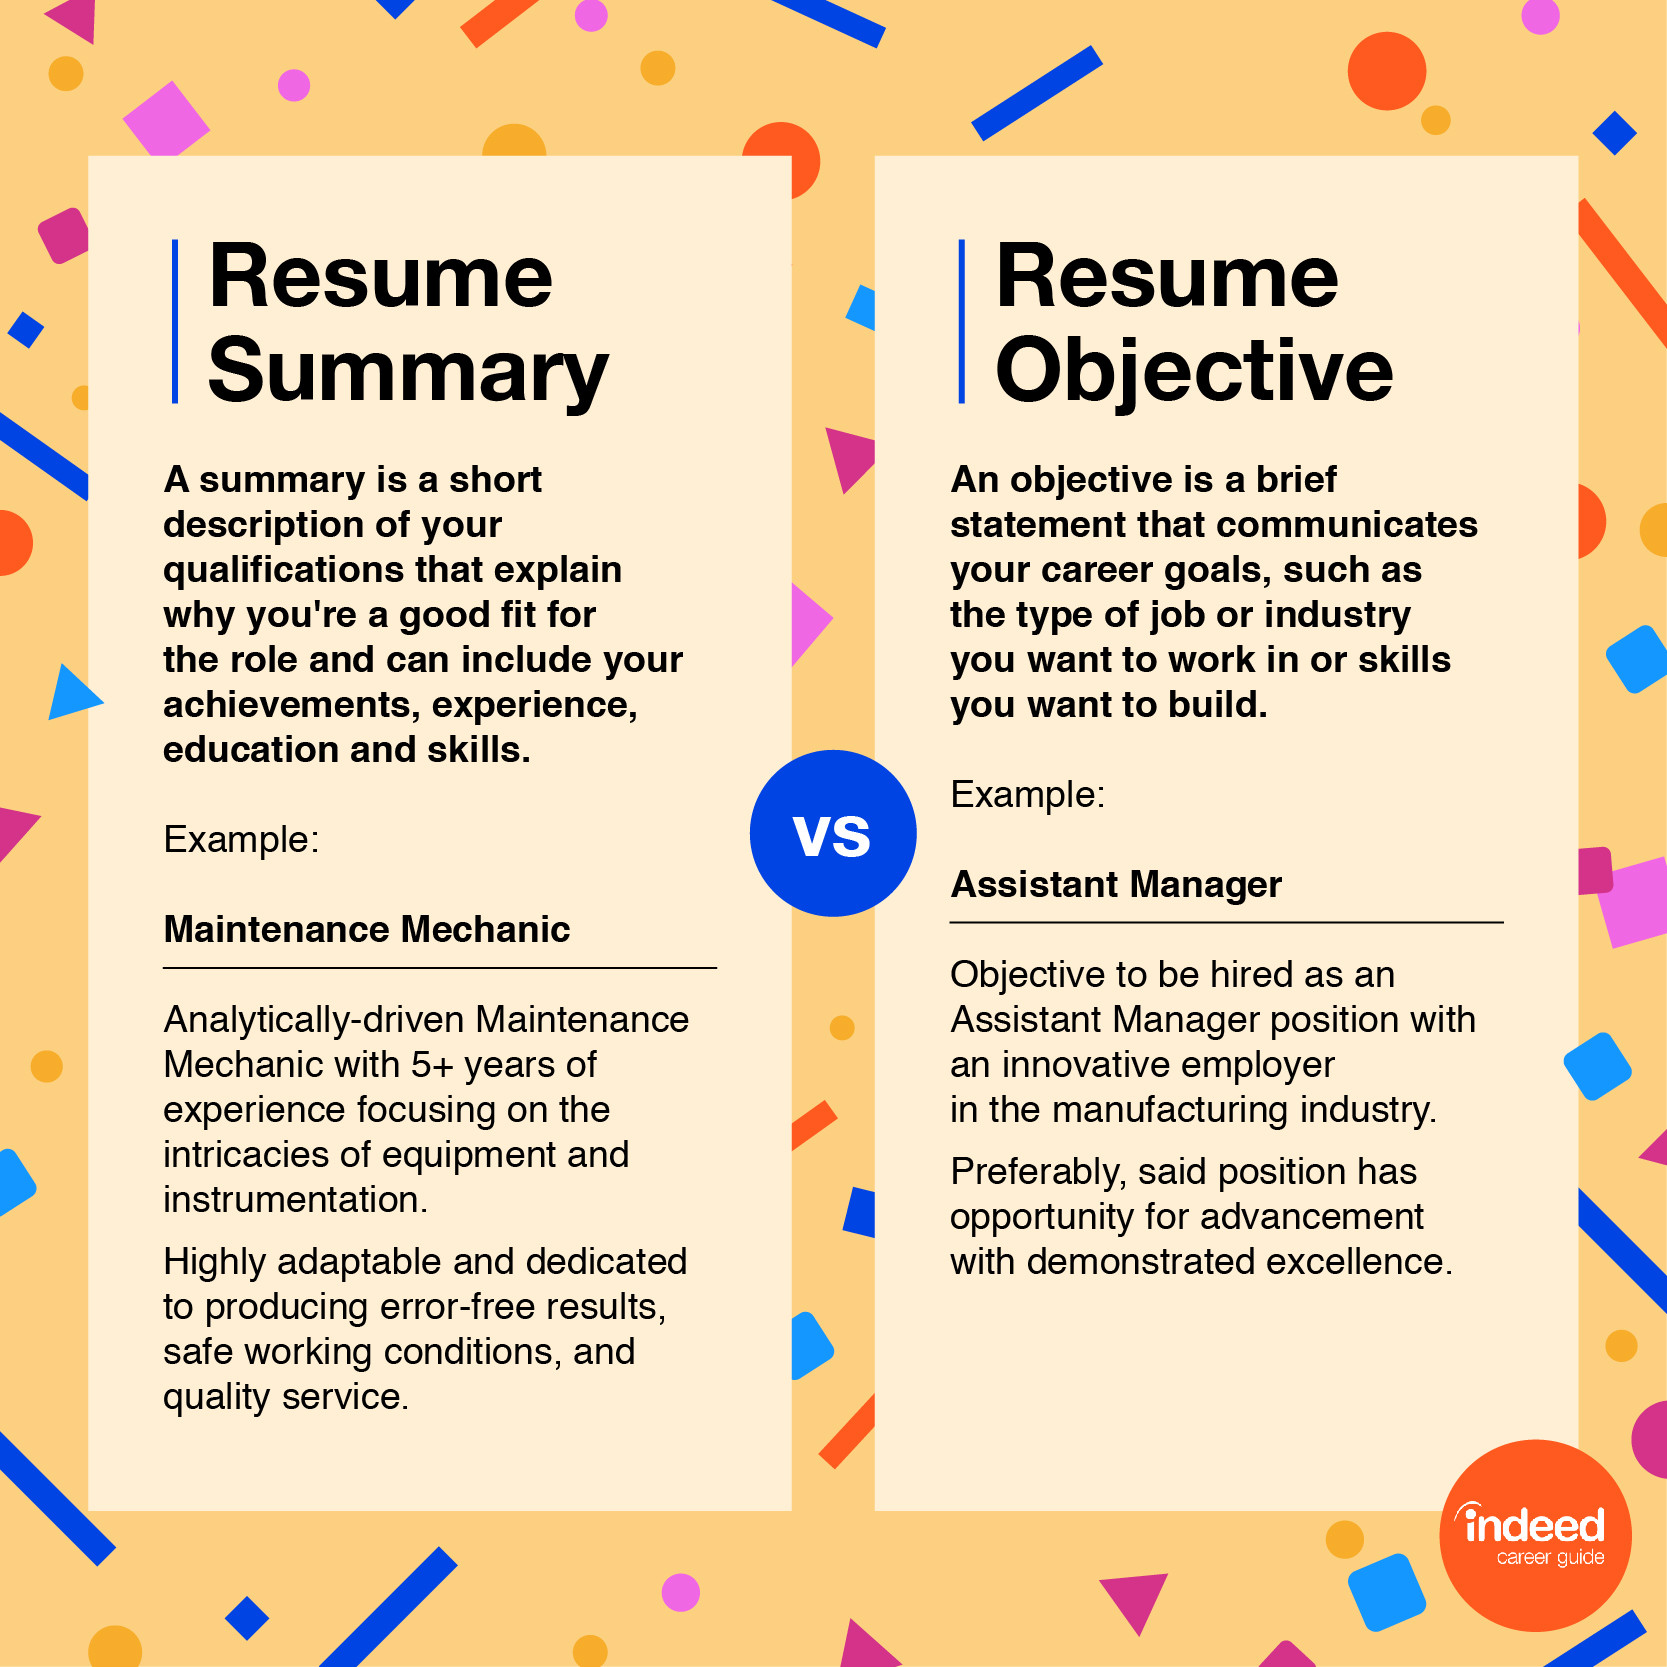 Sample Resume Objective Statements for Students 70lancarrezekiq Resume Objective Examples (with Tips and How-to Guide …